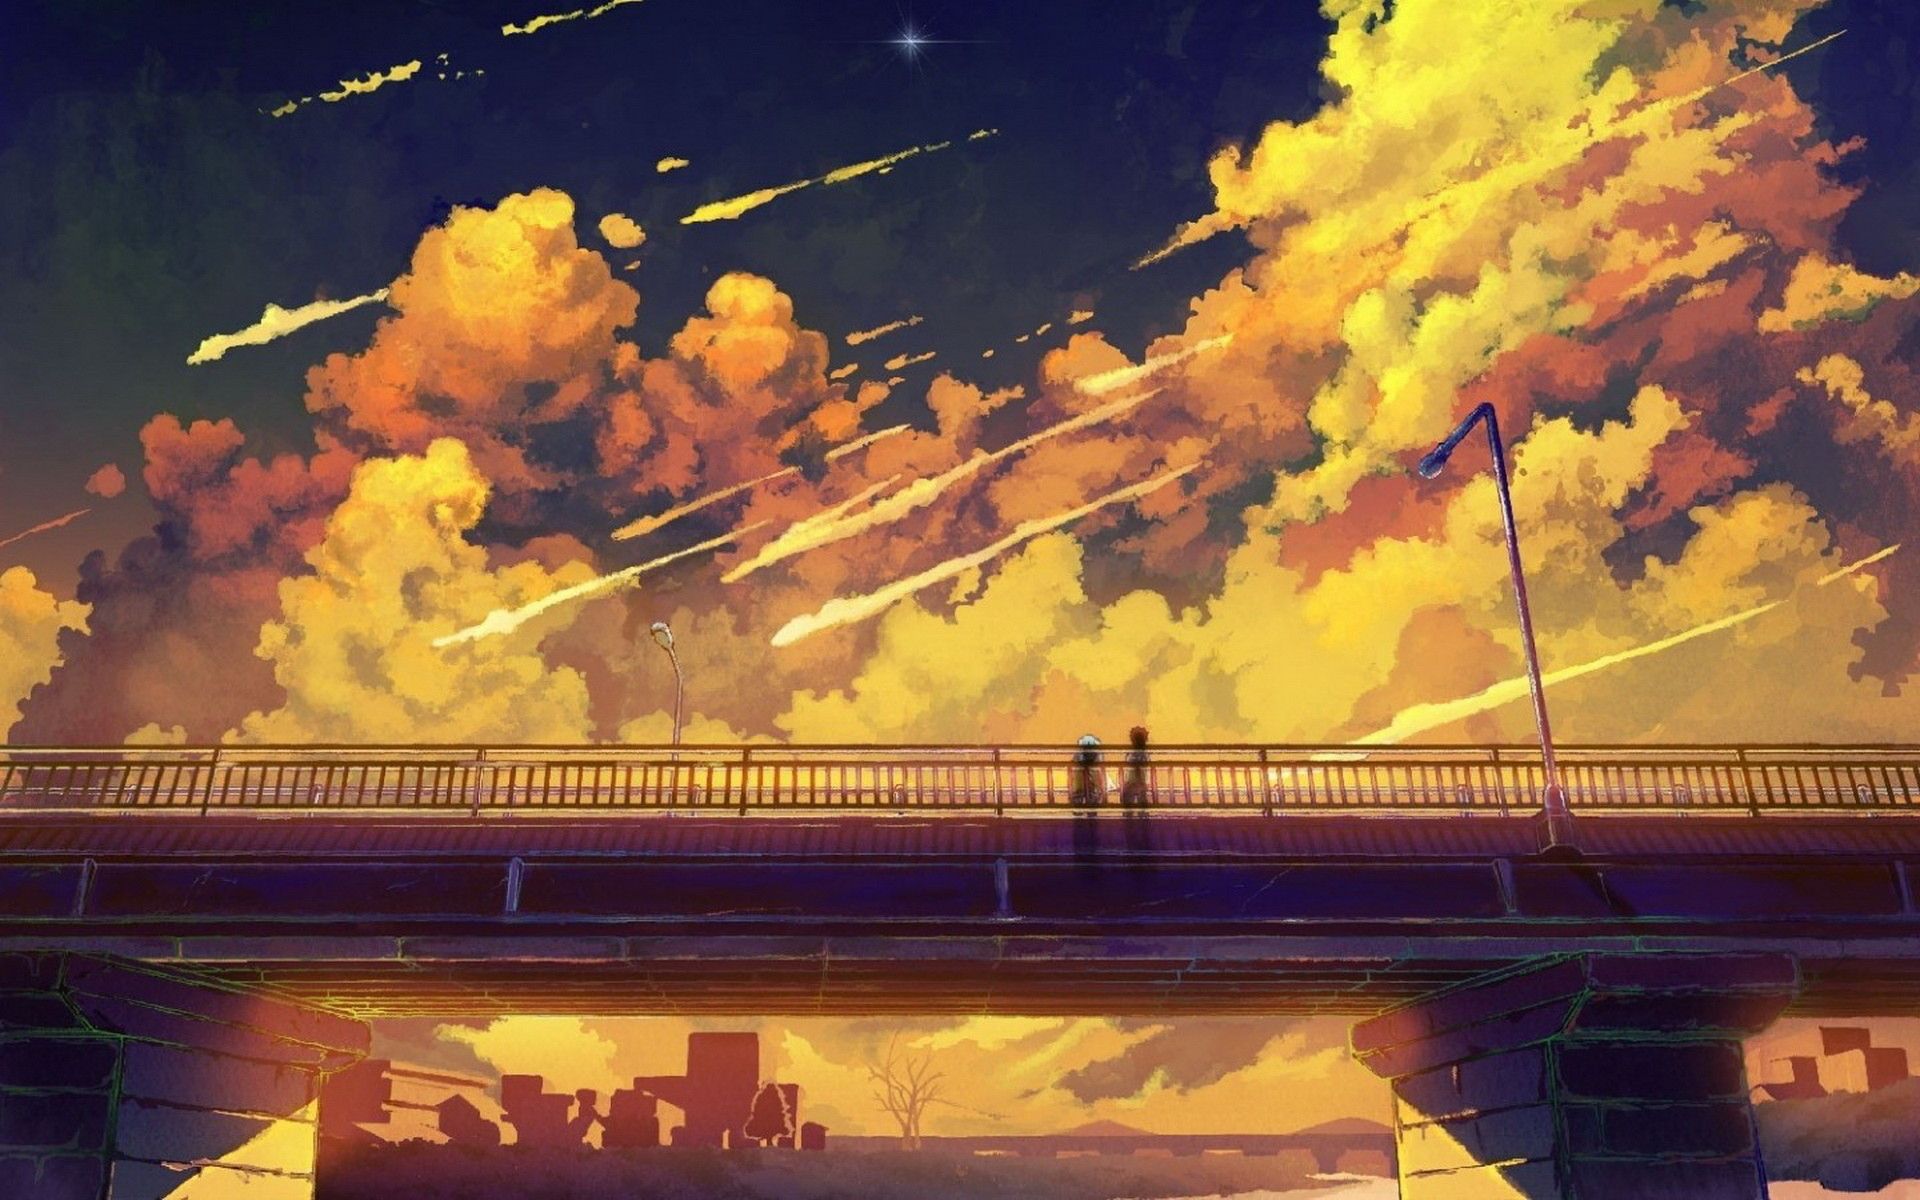 A painting of people on the bridge with clouds in front - Anime landscape